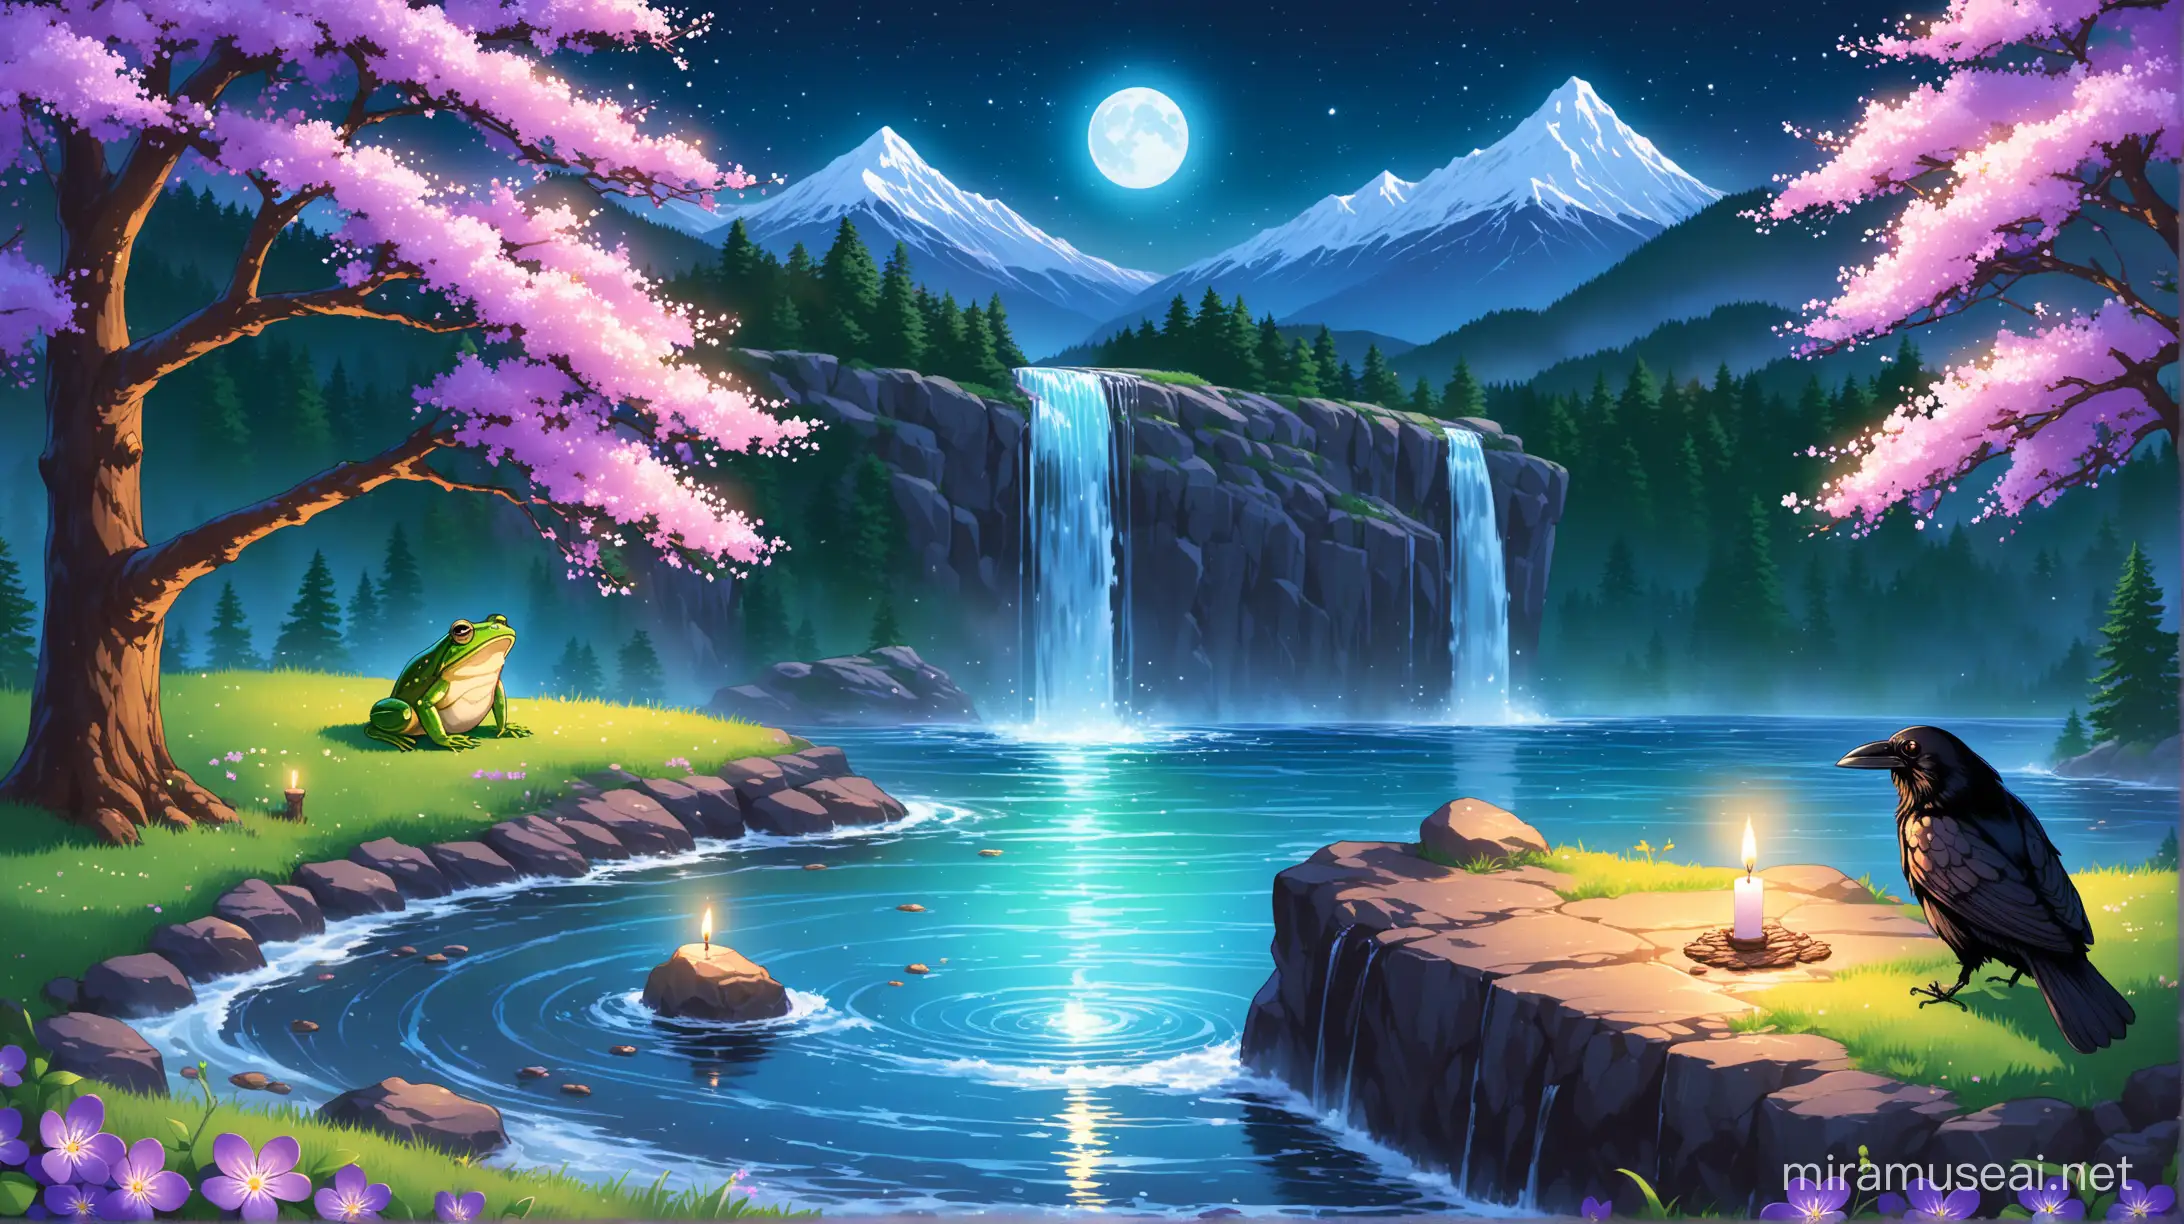 Moonlit Pond Scene with Frog Leap and Crow Perch Amidst Waterfall and Cherry Blossoms